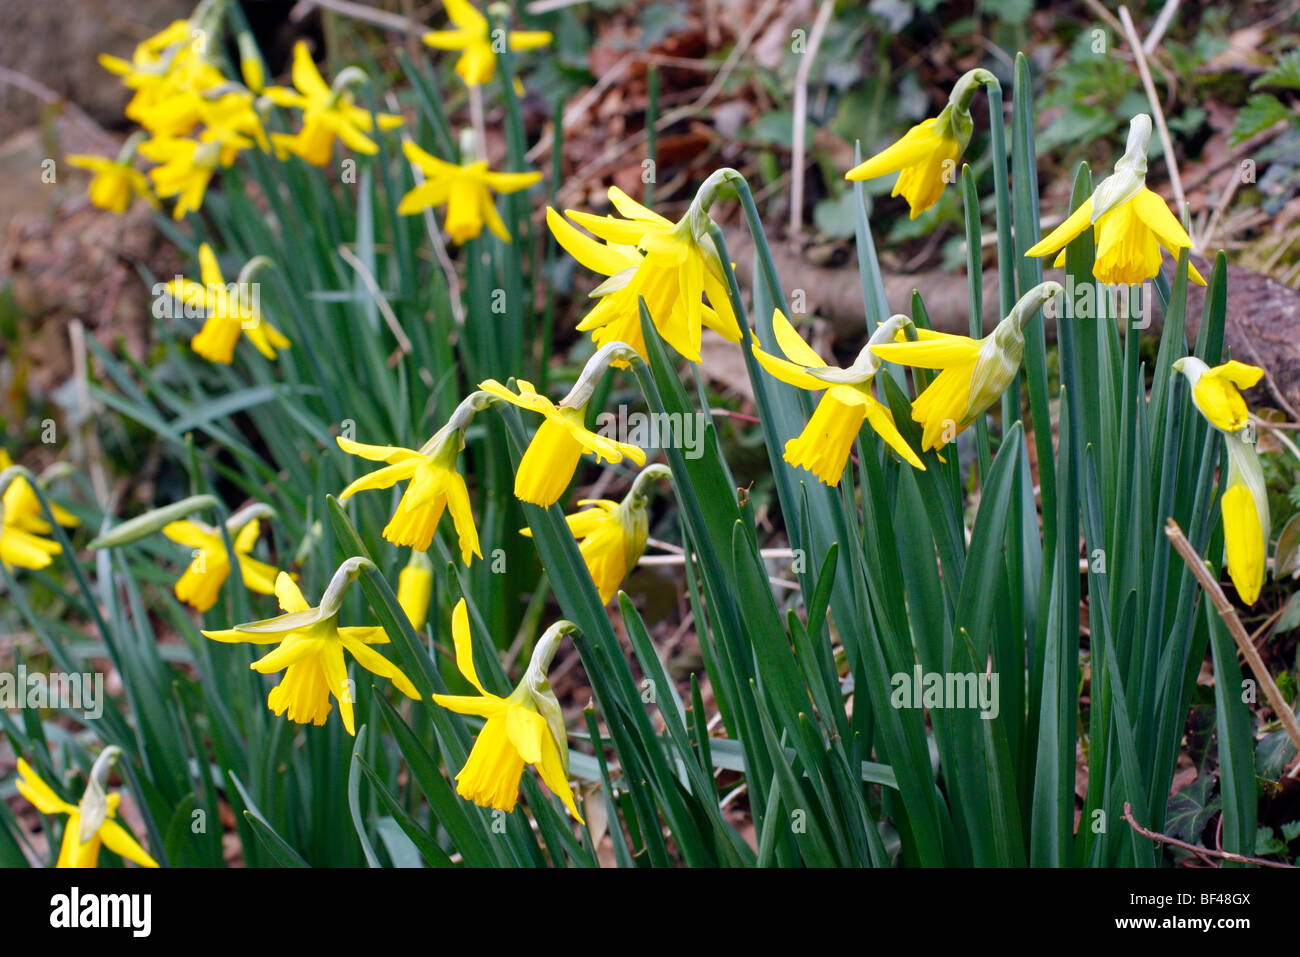 Narcissus February Gold on a Devon bank Stock Photo